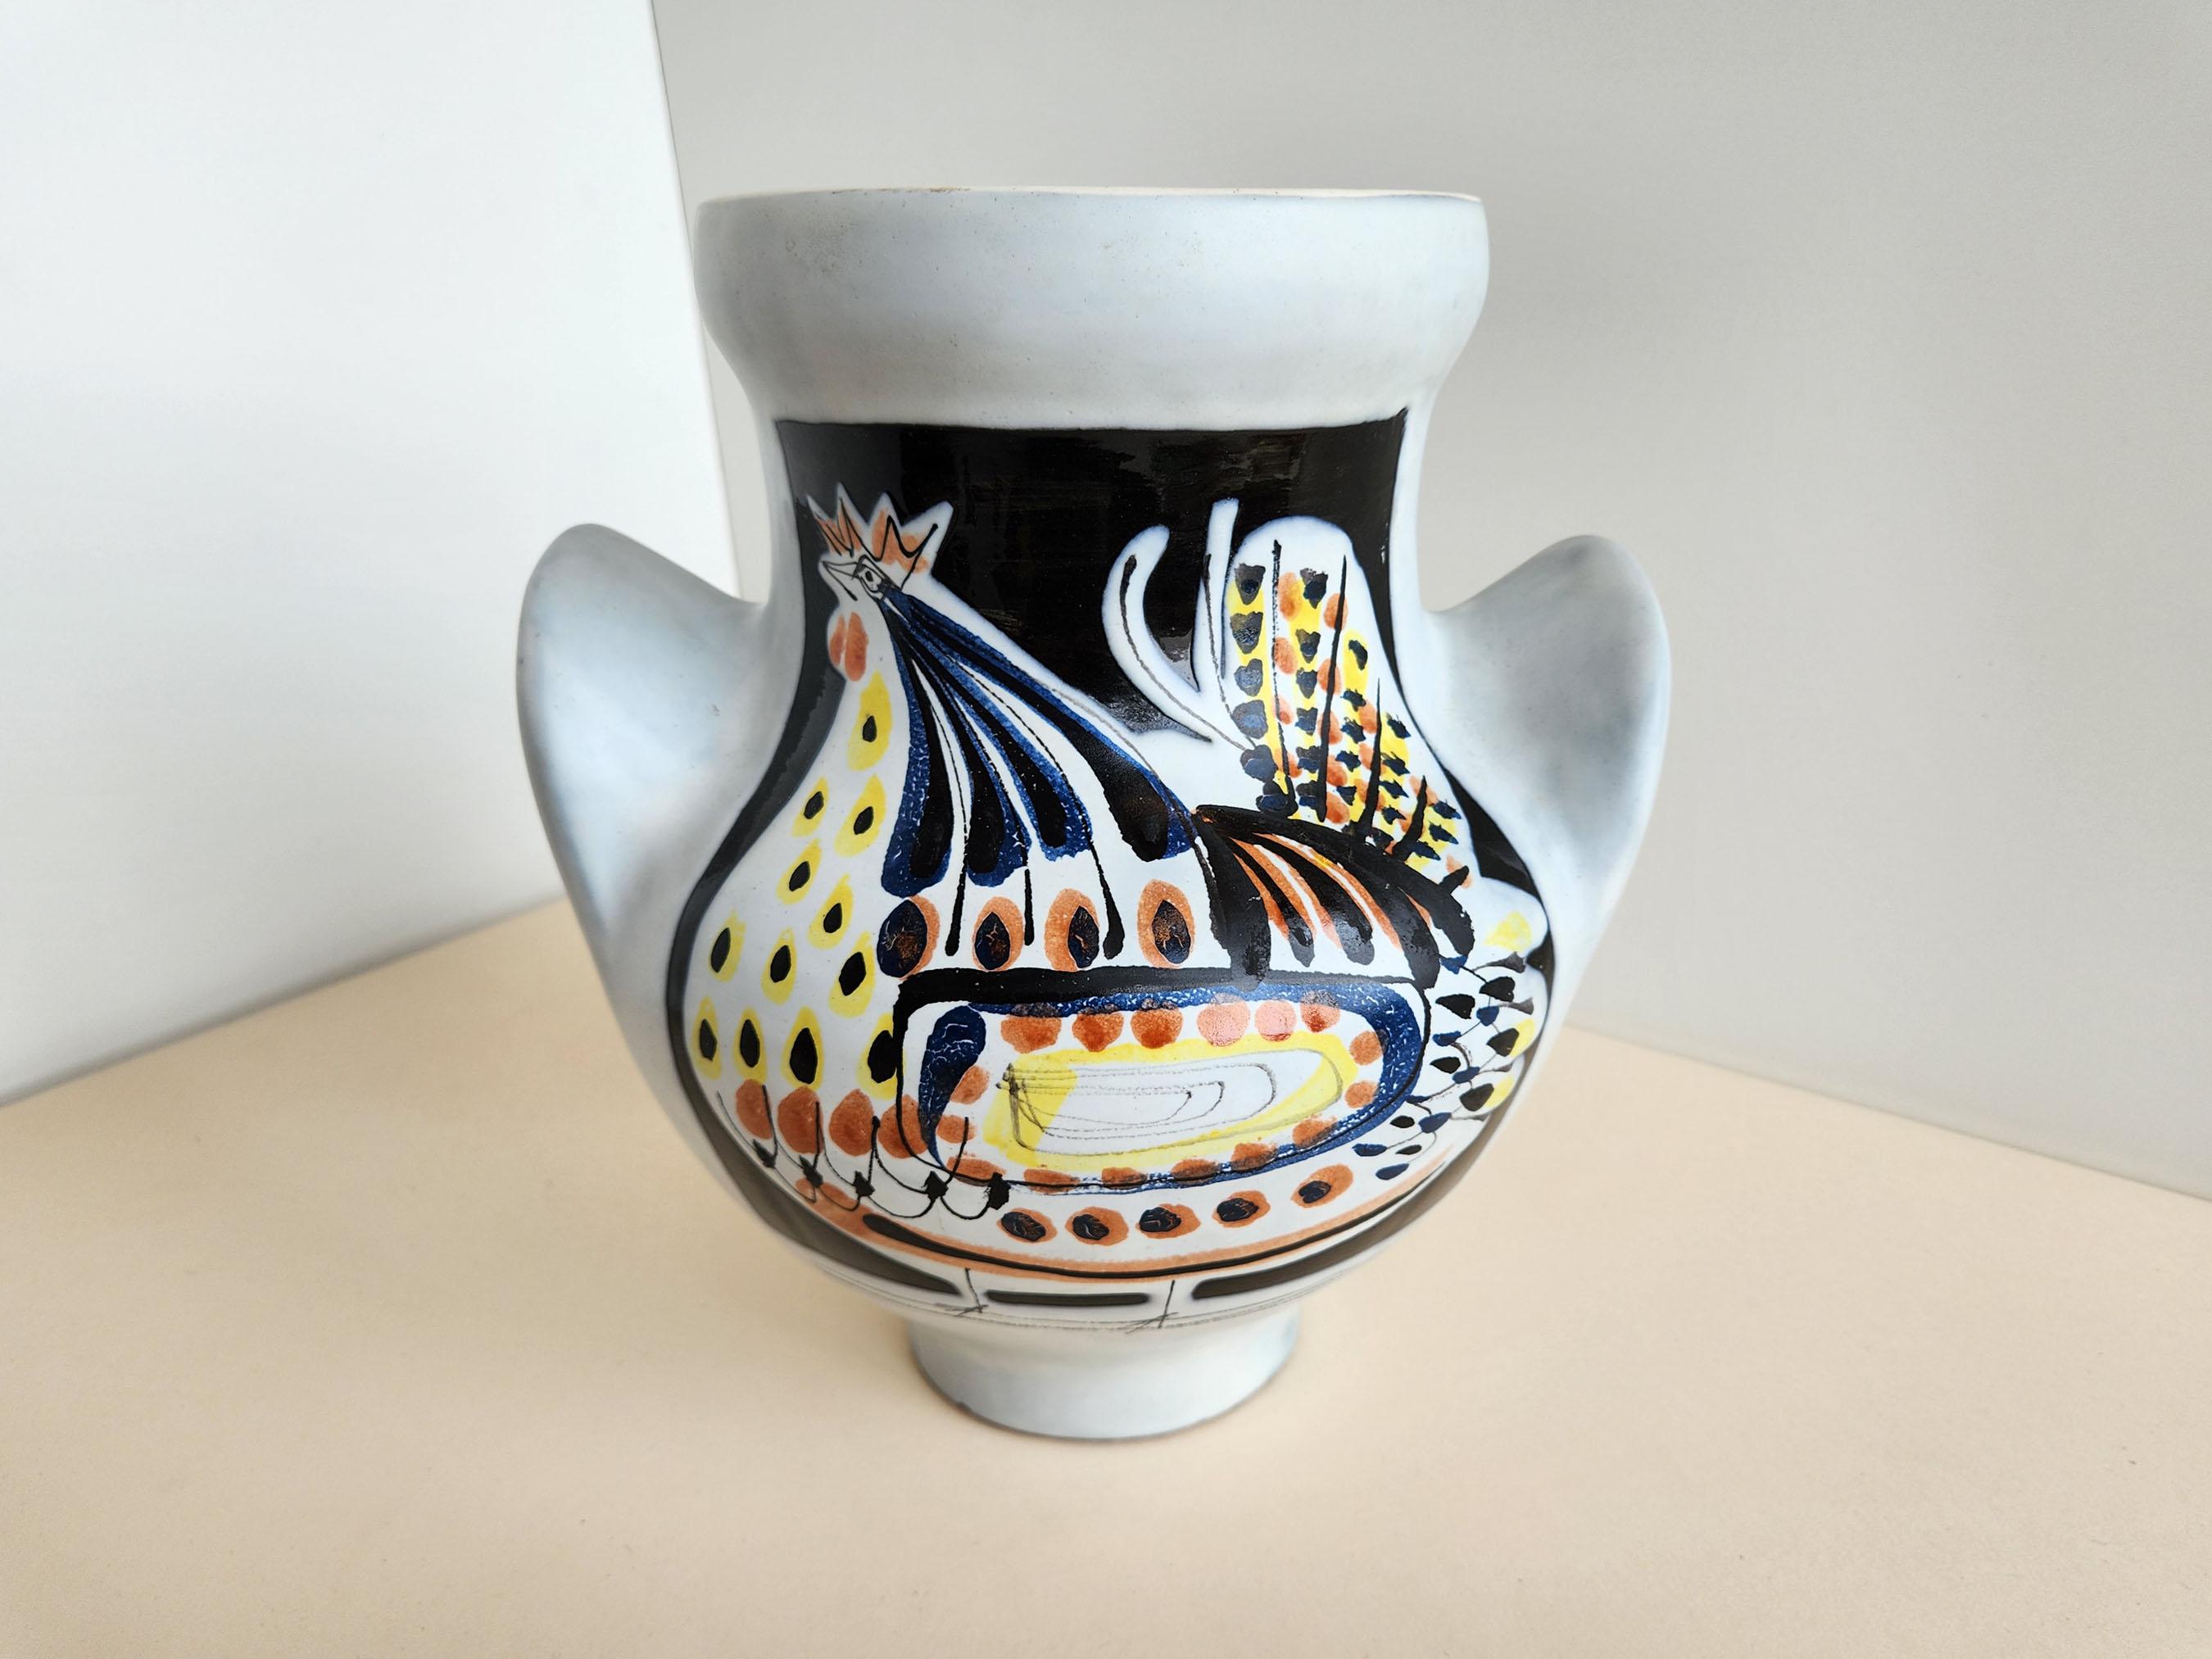 Vintage ceramic vase with rooster by Roger Capron

Vallauris, France.

Roger Capron was in influential French ceramicist, known for his tiled tables and his use of recurring motifs such as stylized branches and geometrical suns. He was born in